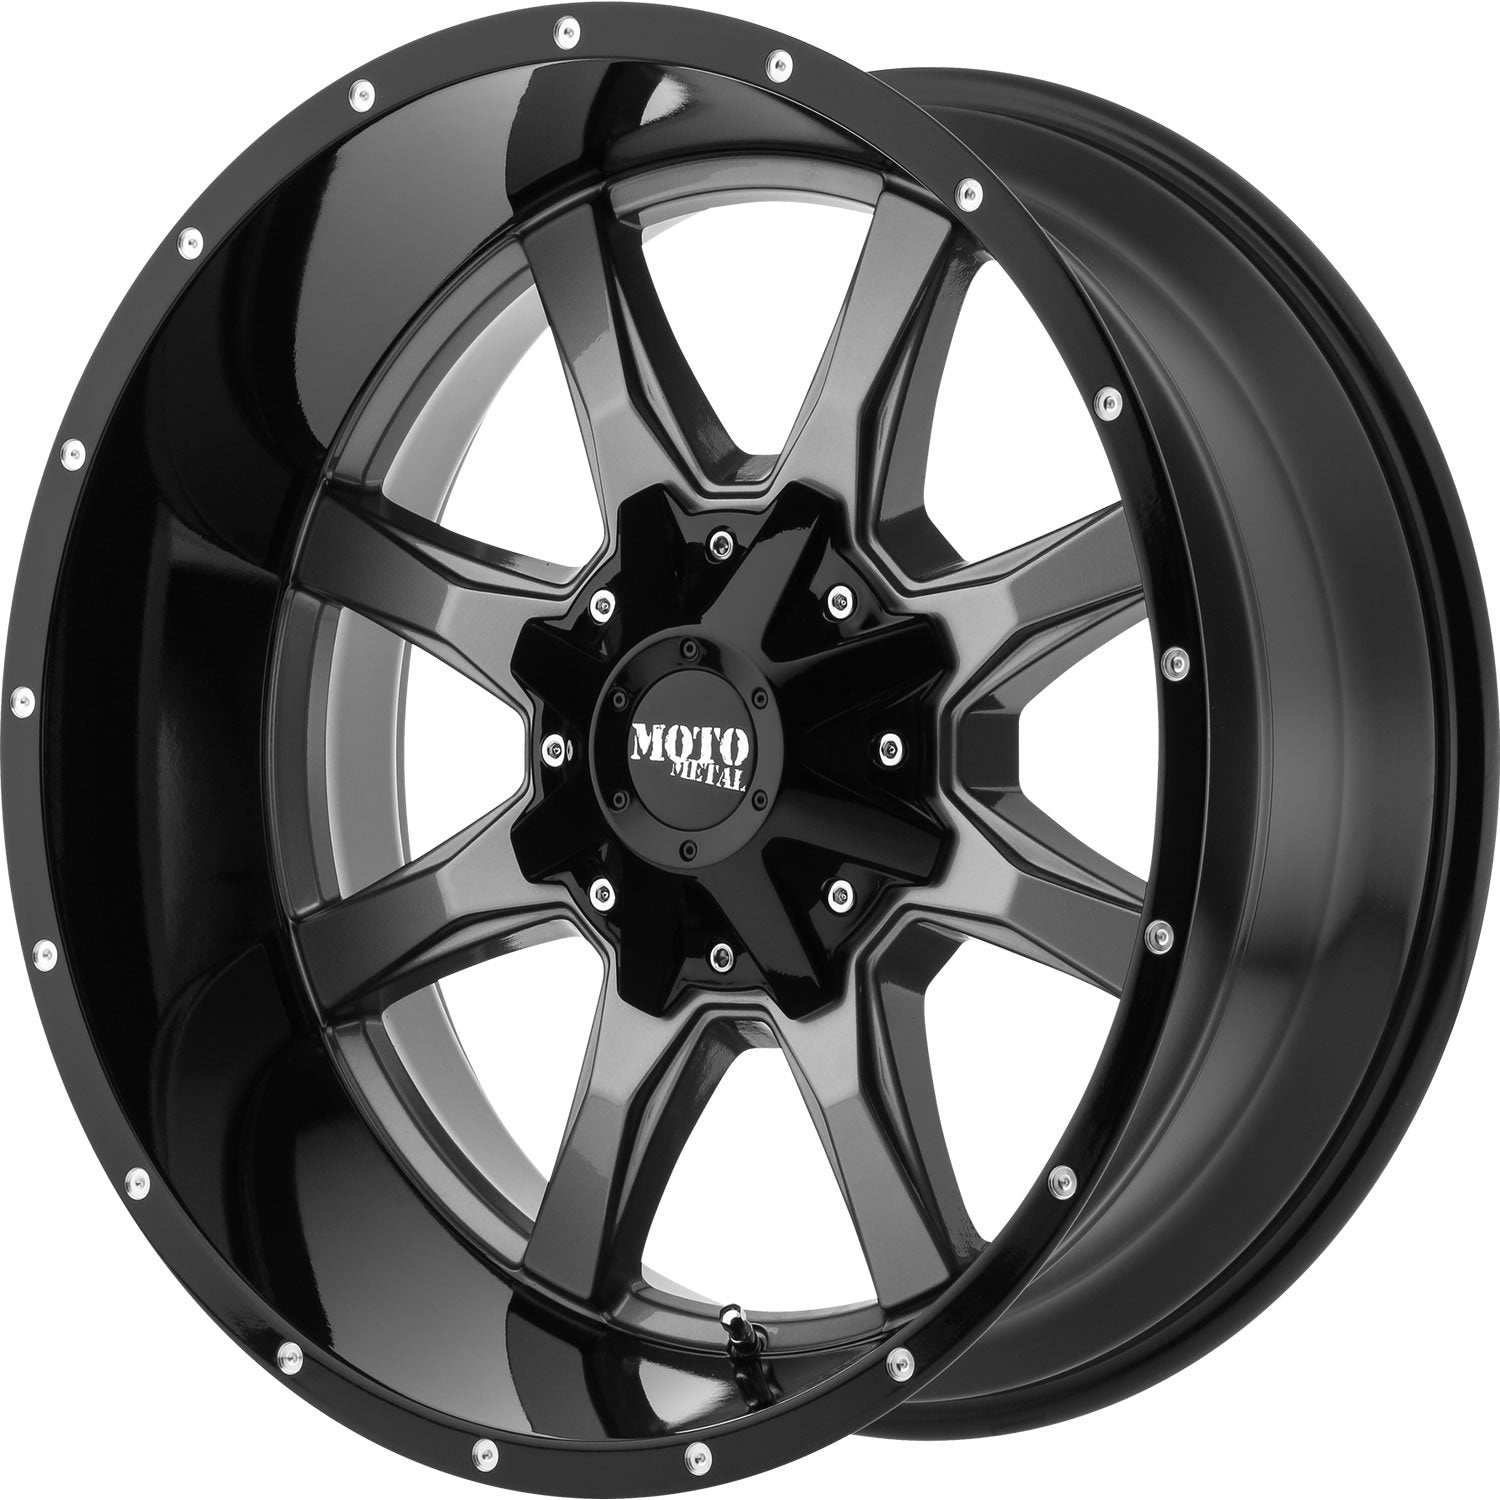 Moto Metal MO970 20x9 18 6x135/6x139.7 (6x5.5) Gray and Black - Tires and Engine Performance